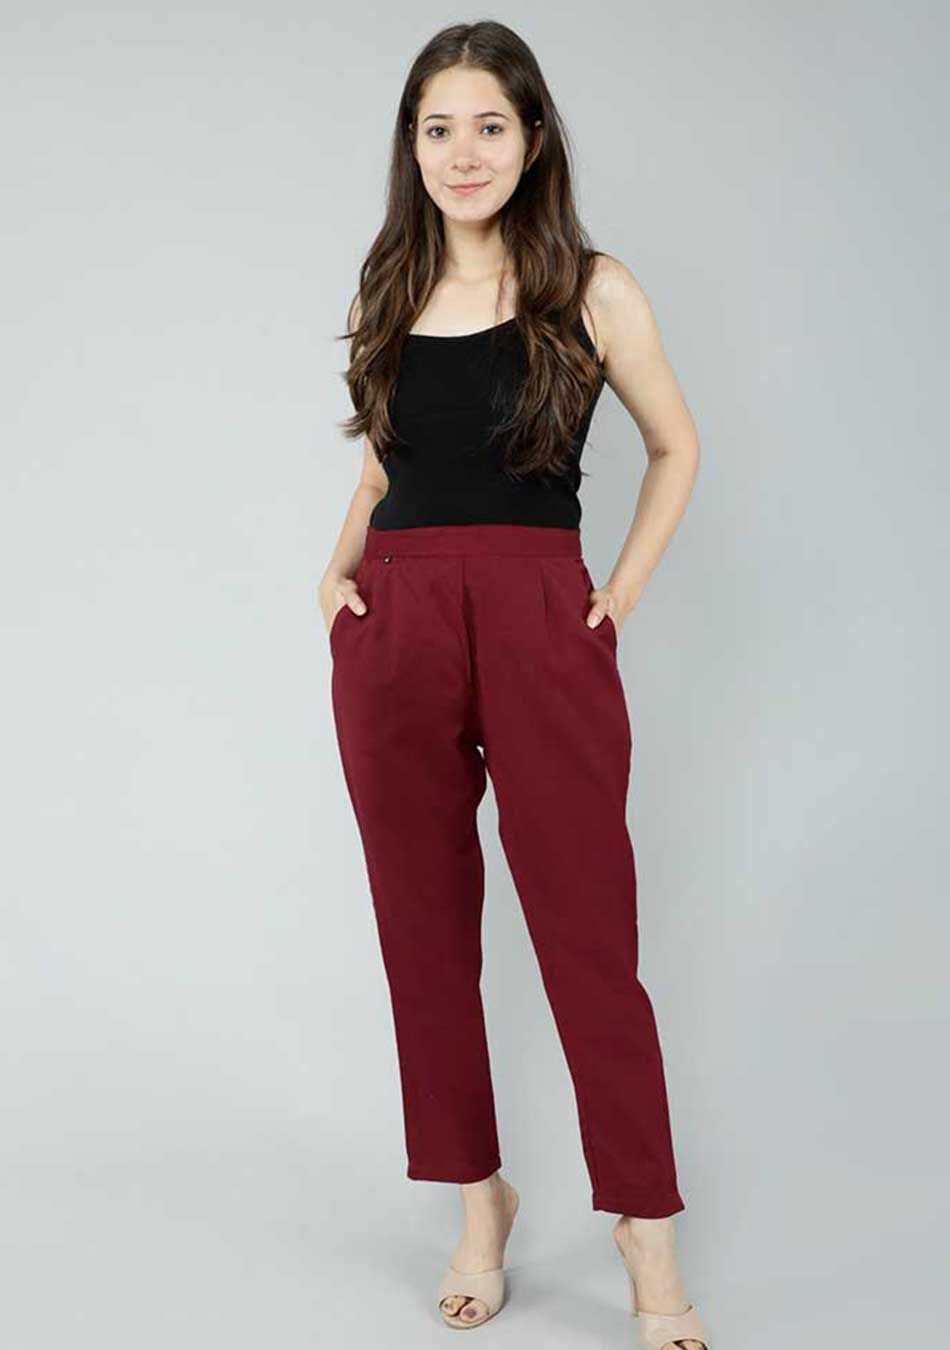 Solid Red Cotton Fabric Pants